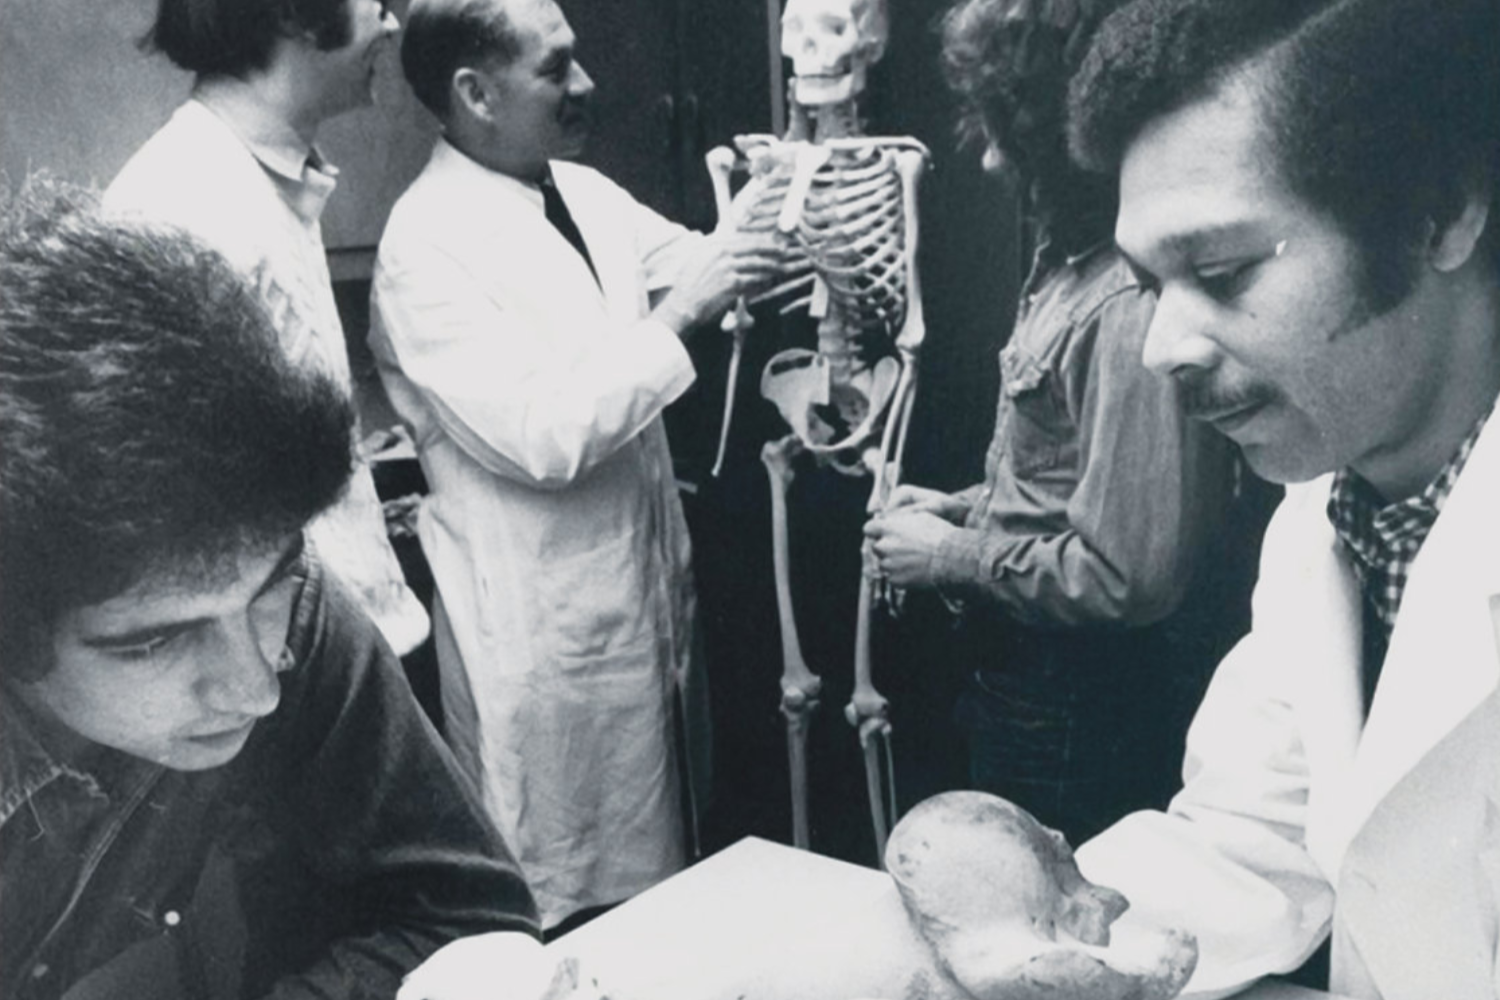 An old black and white photo of students and professors in a lab studying animal skeletons